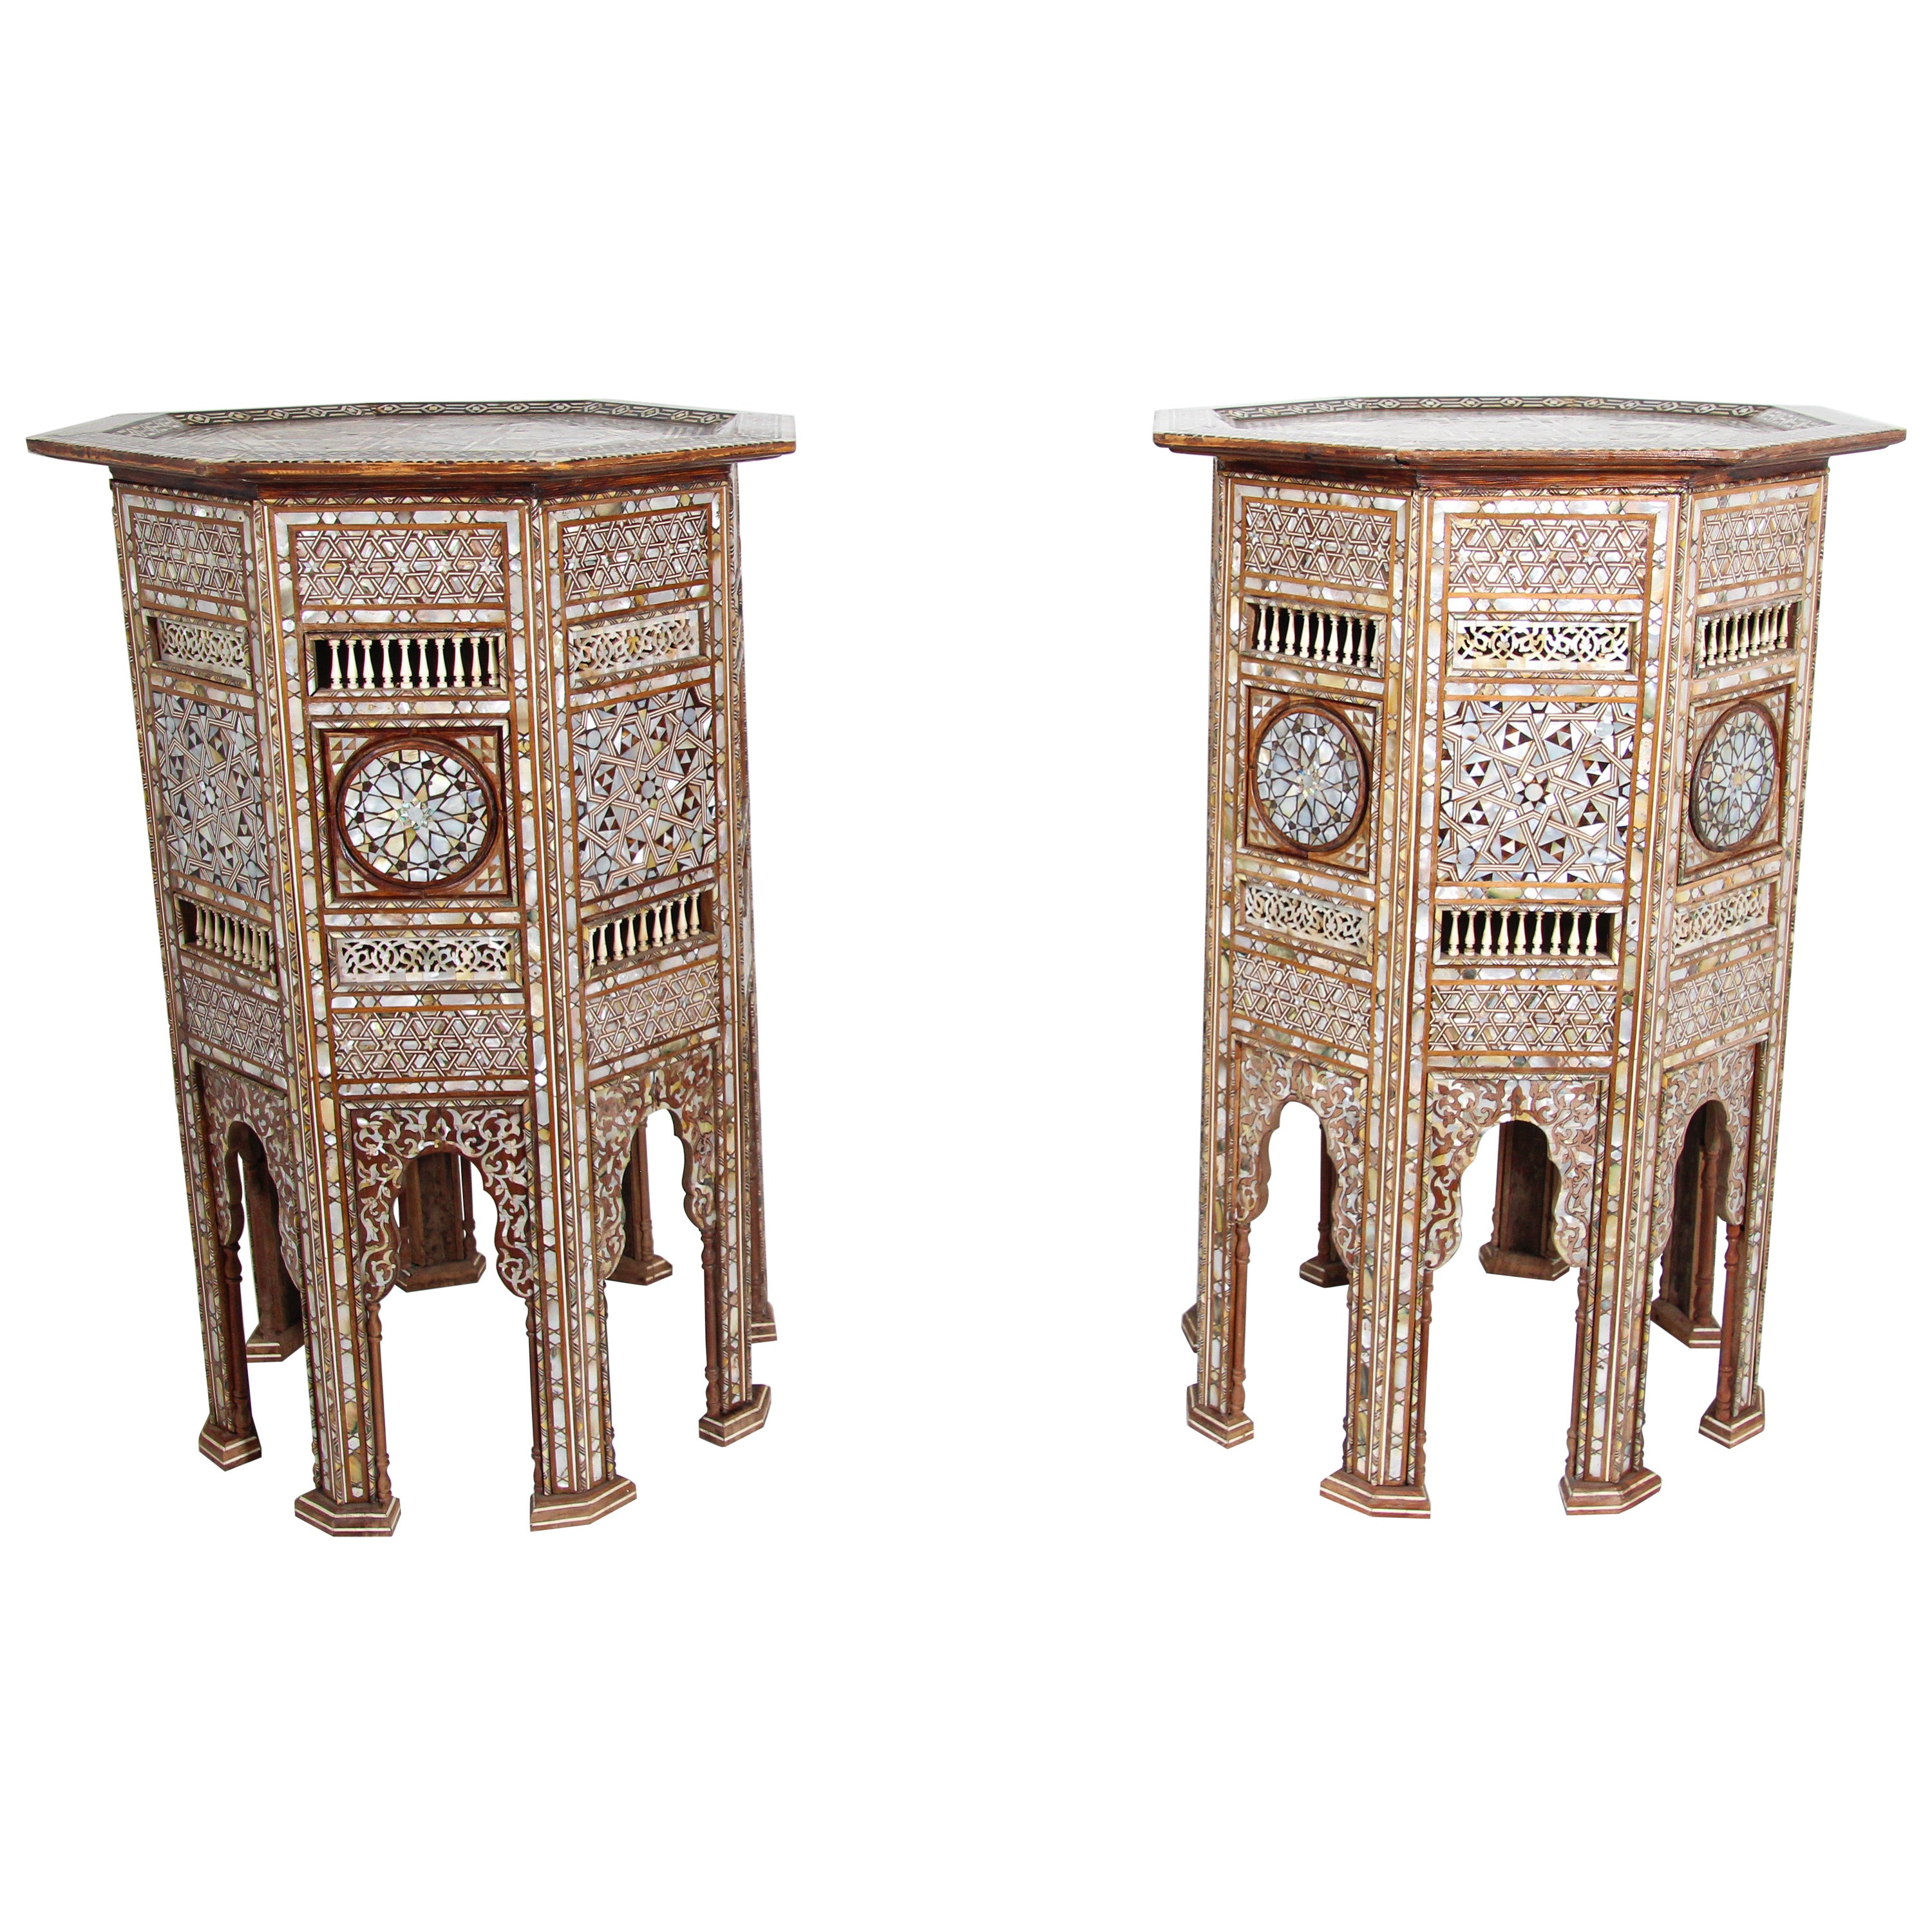 Moorish Middle Eastern Large Pedestal Tables Inlaid with Shell, 19th C.